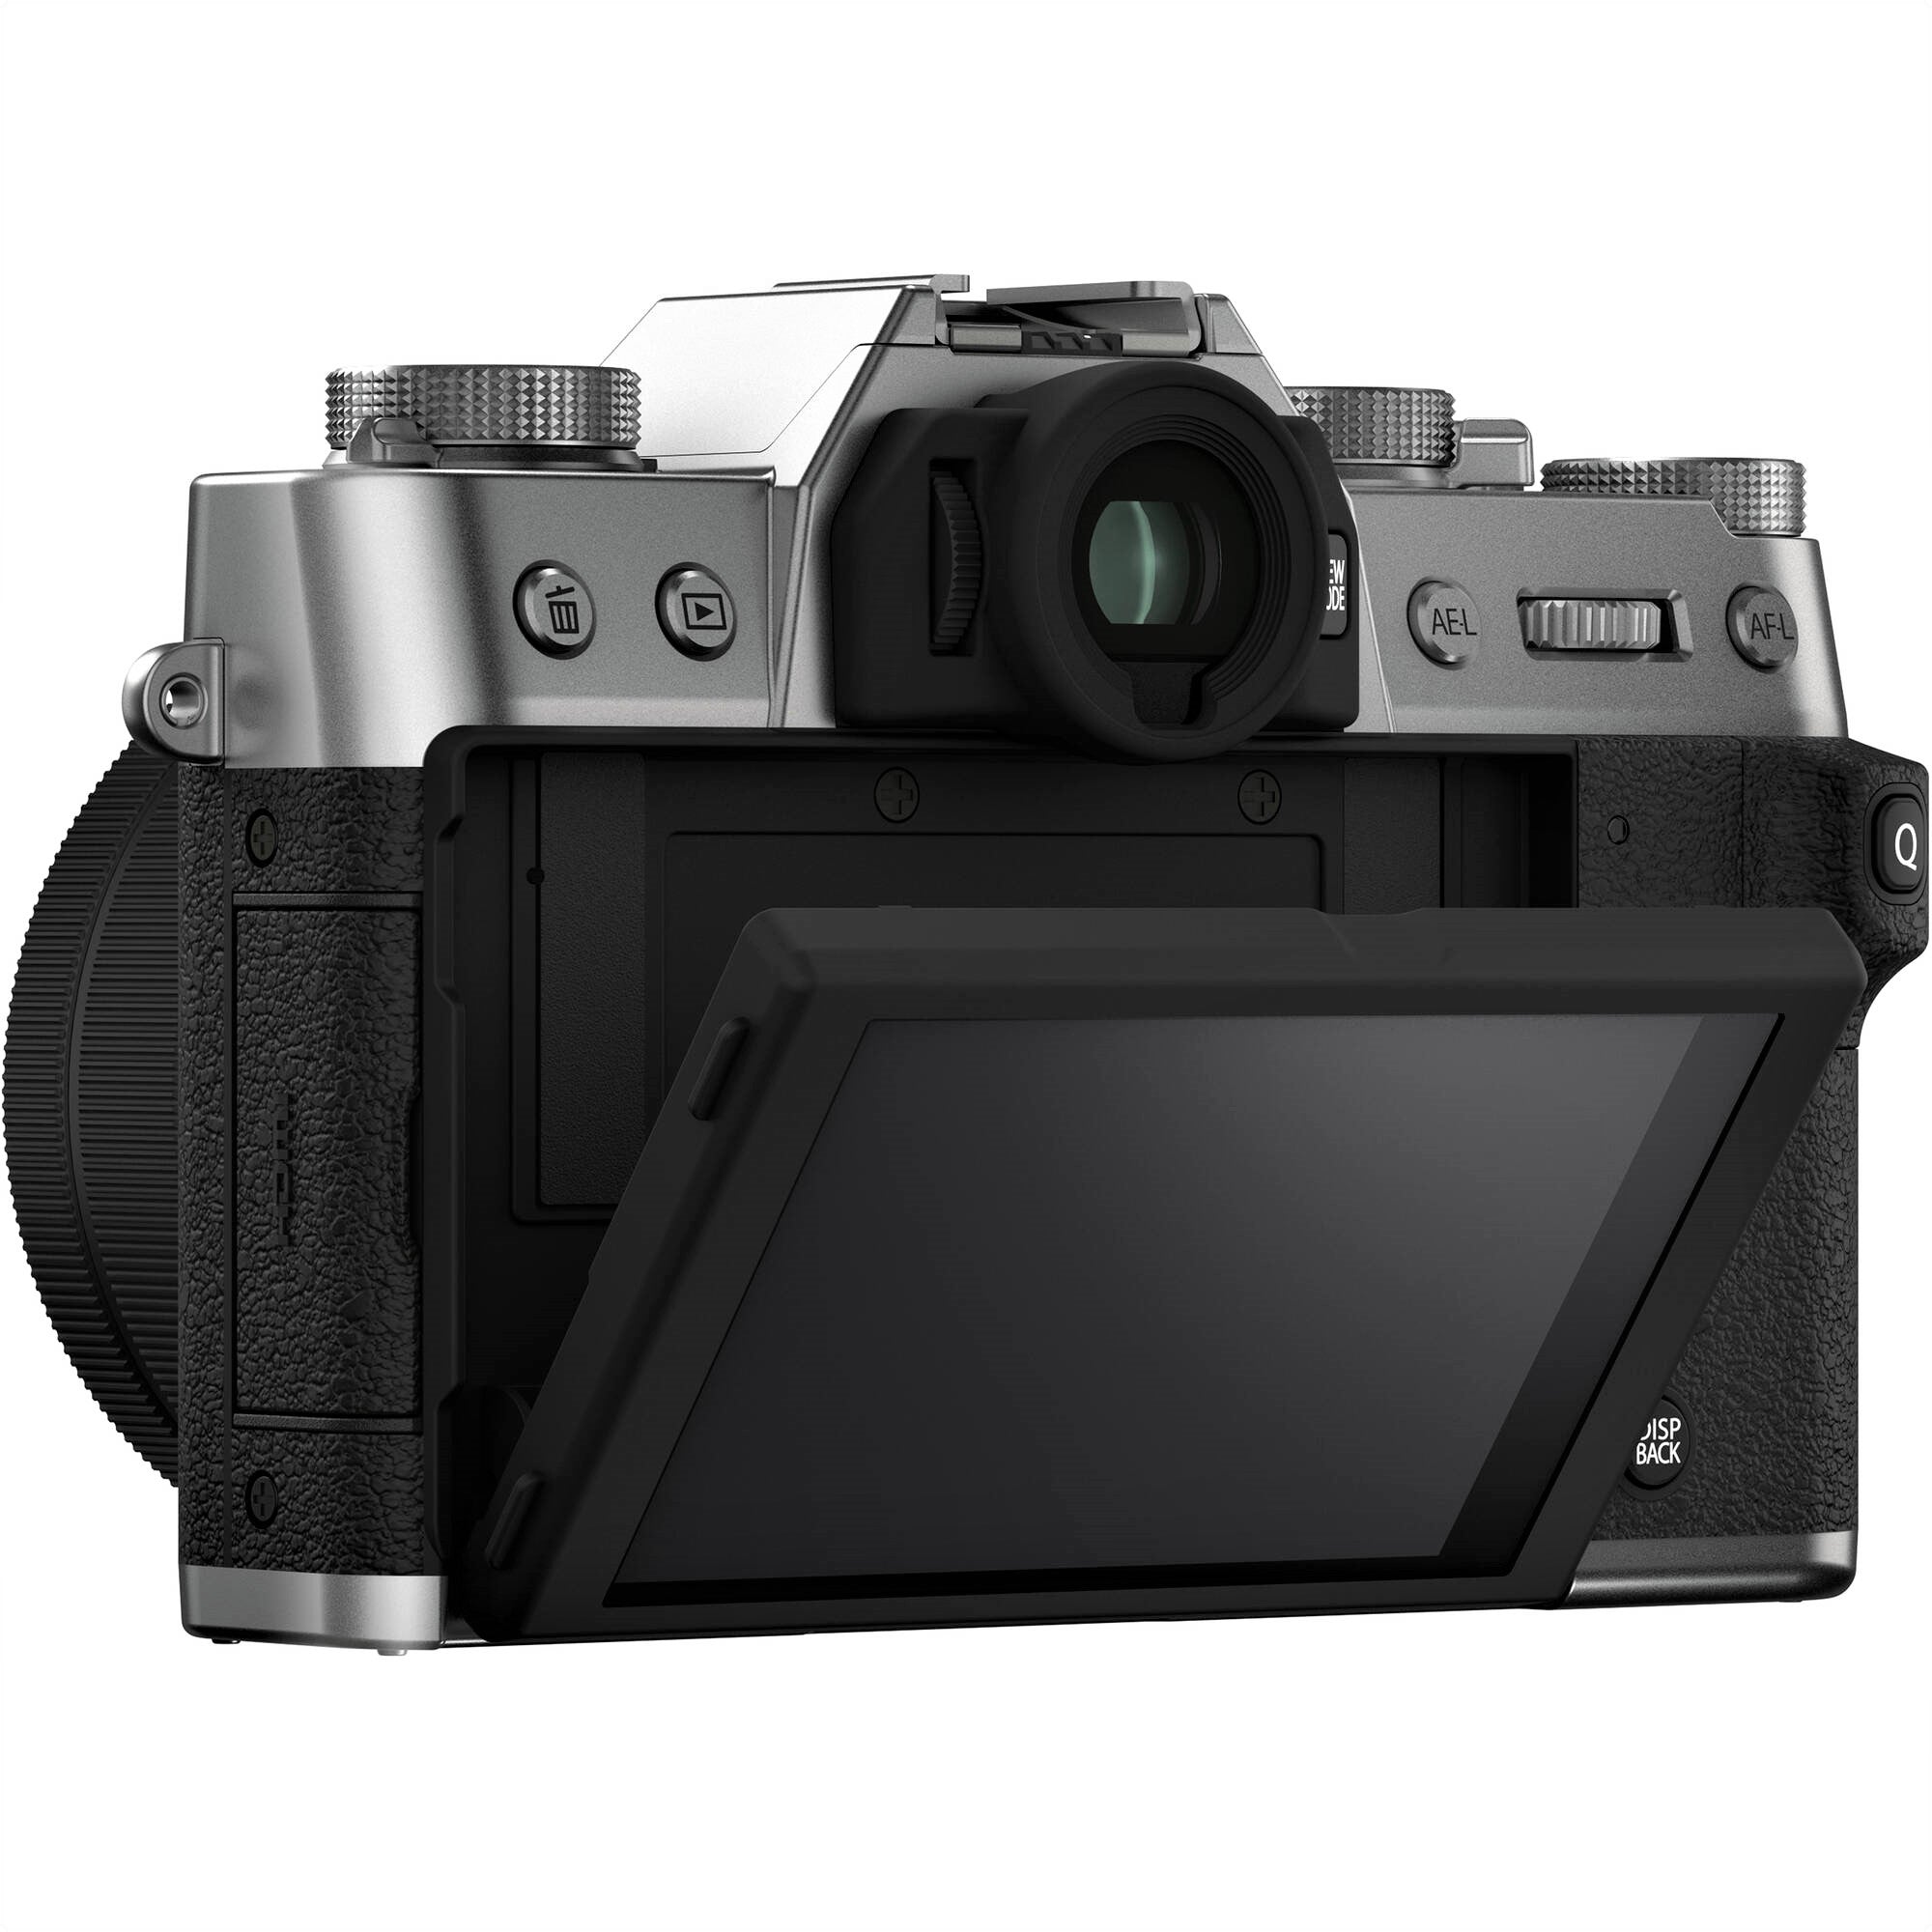 Fujifilm X-T30 II Mirrorless Camera (Silver) - Lens not Included